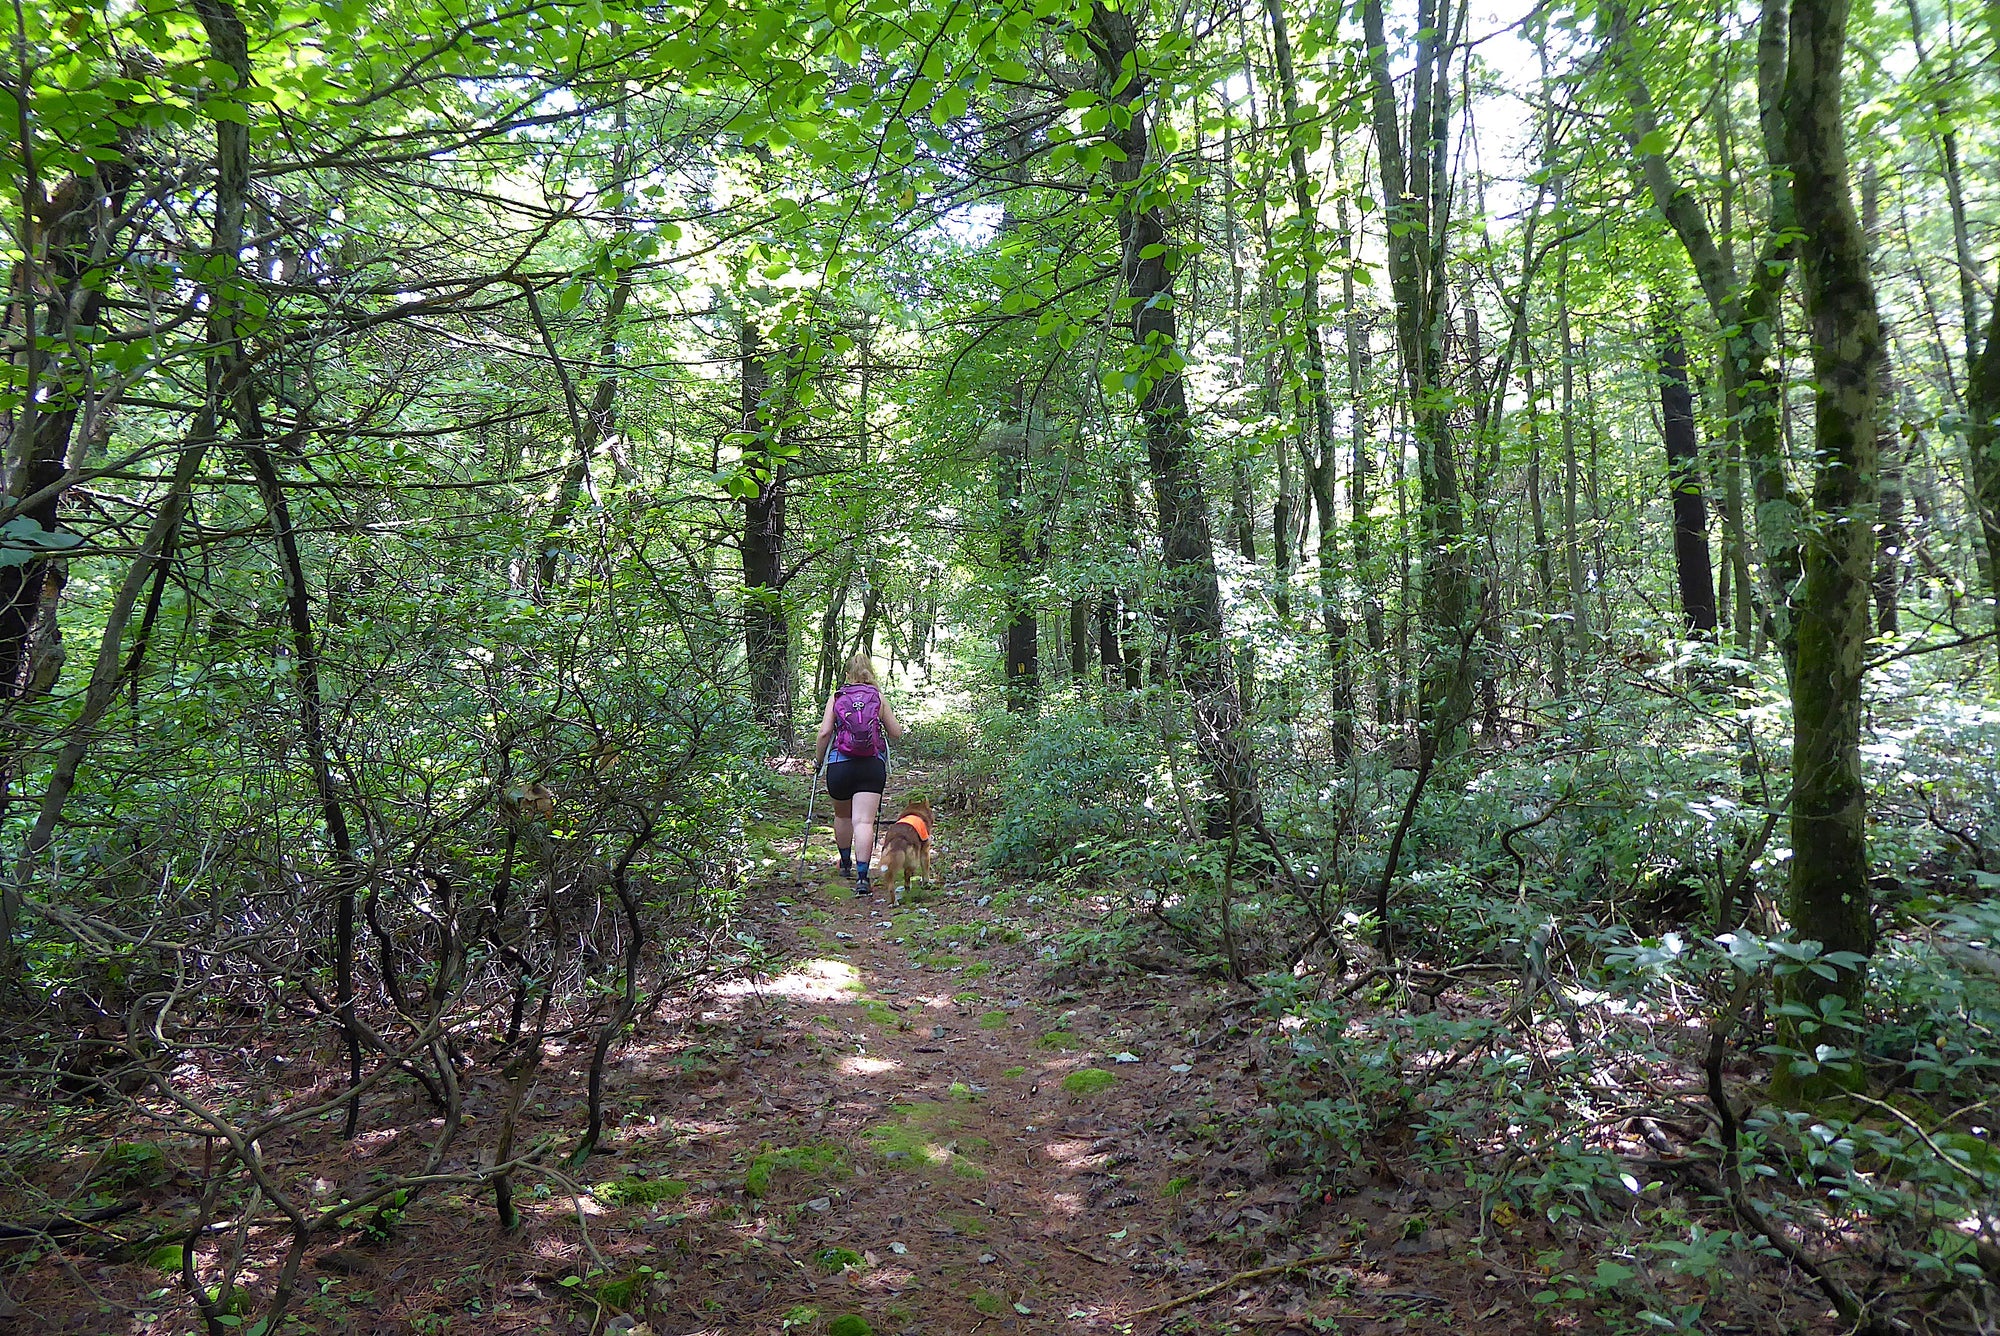 Take A Hike: 5 Steps To Enjoy A Walk In The Woods